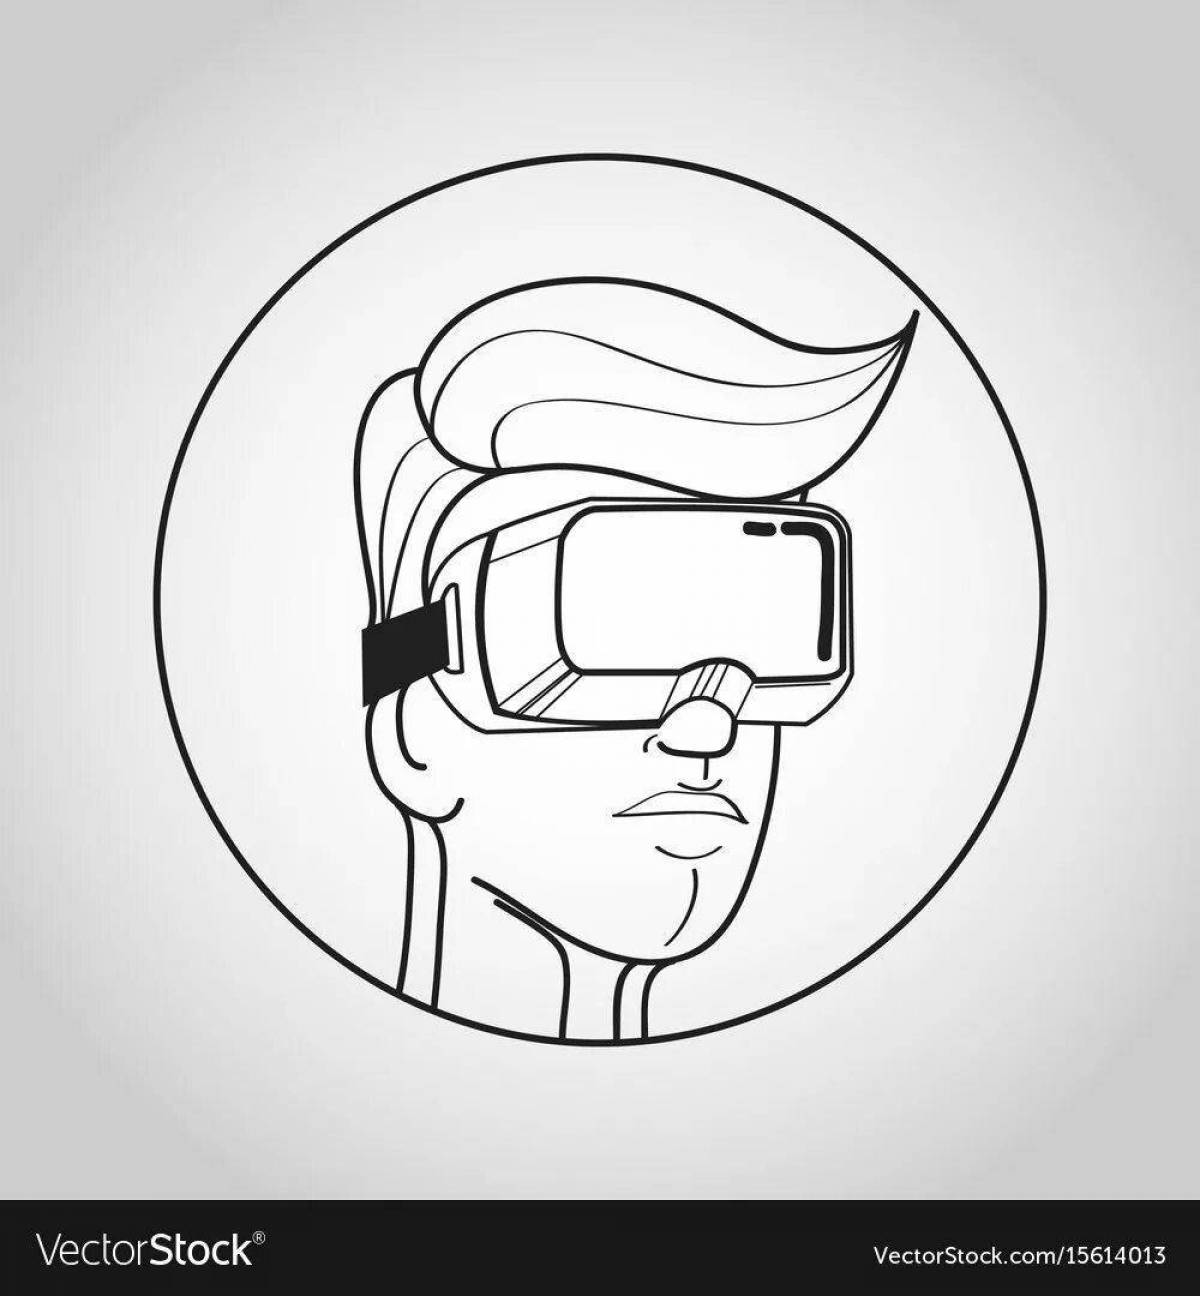 Tempting virtual reality coloring page